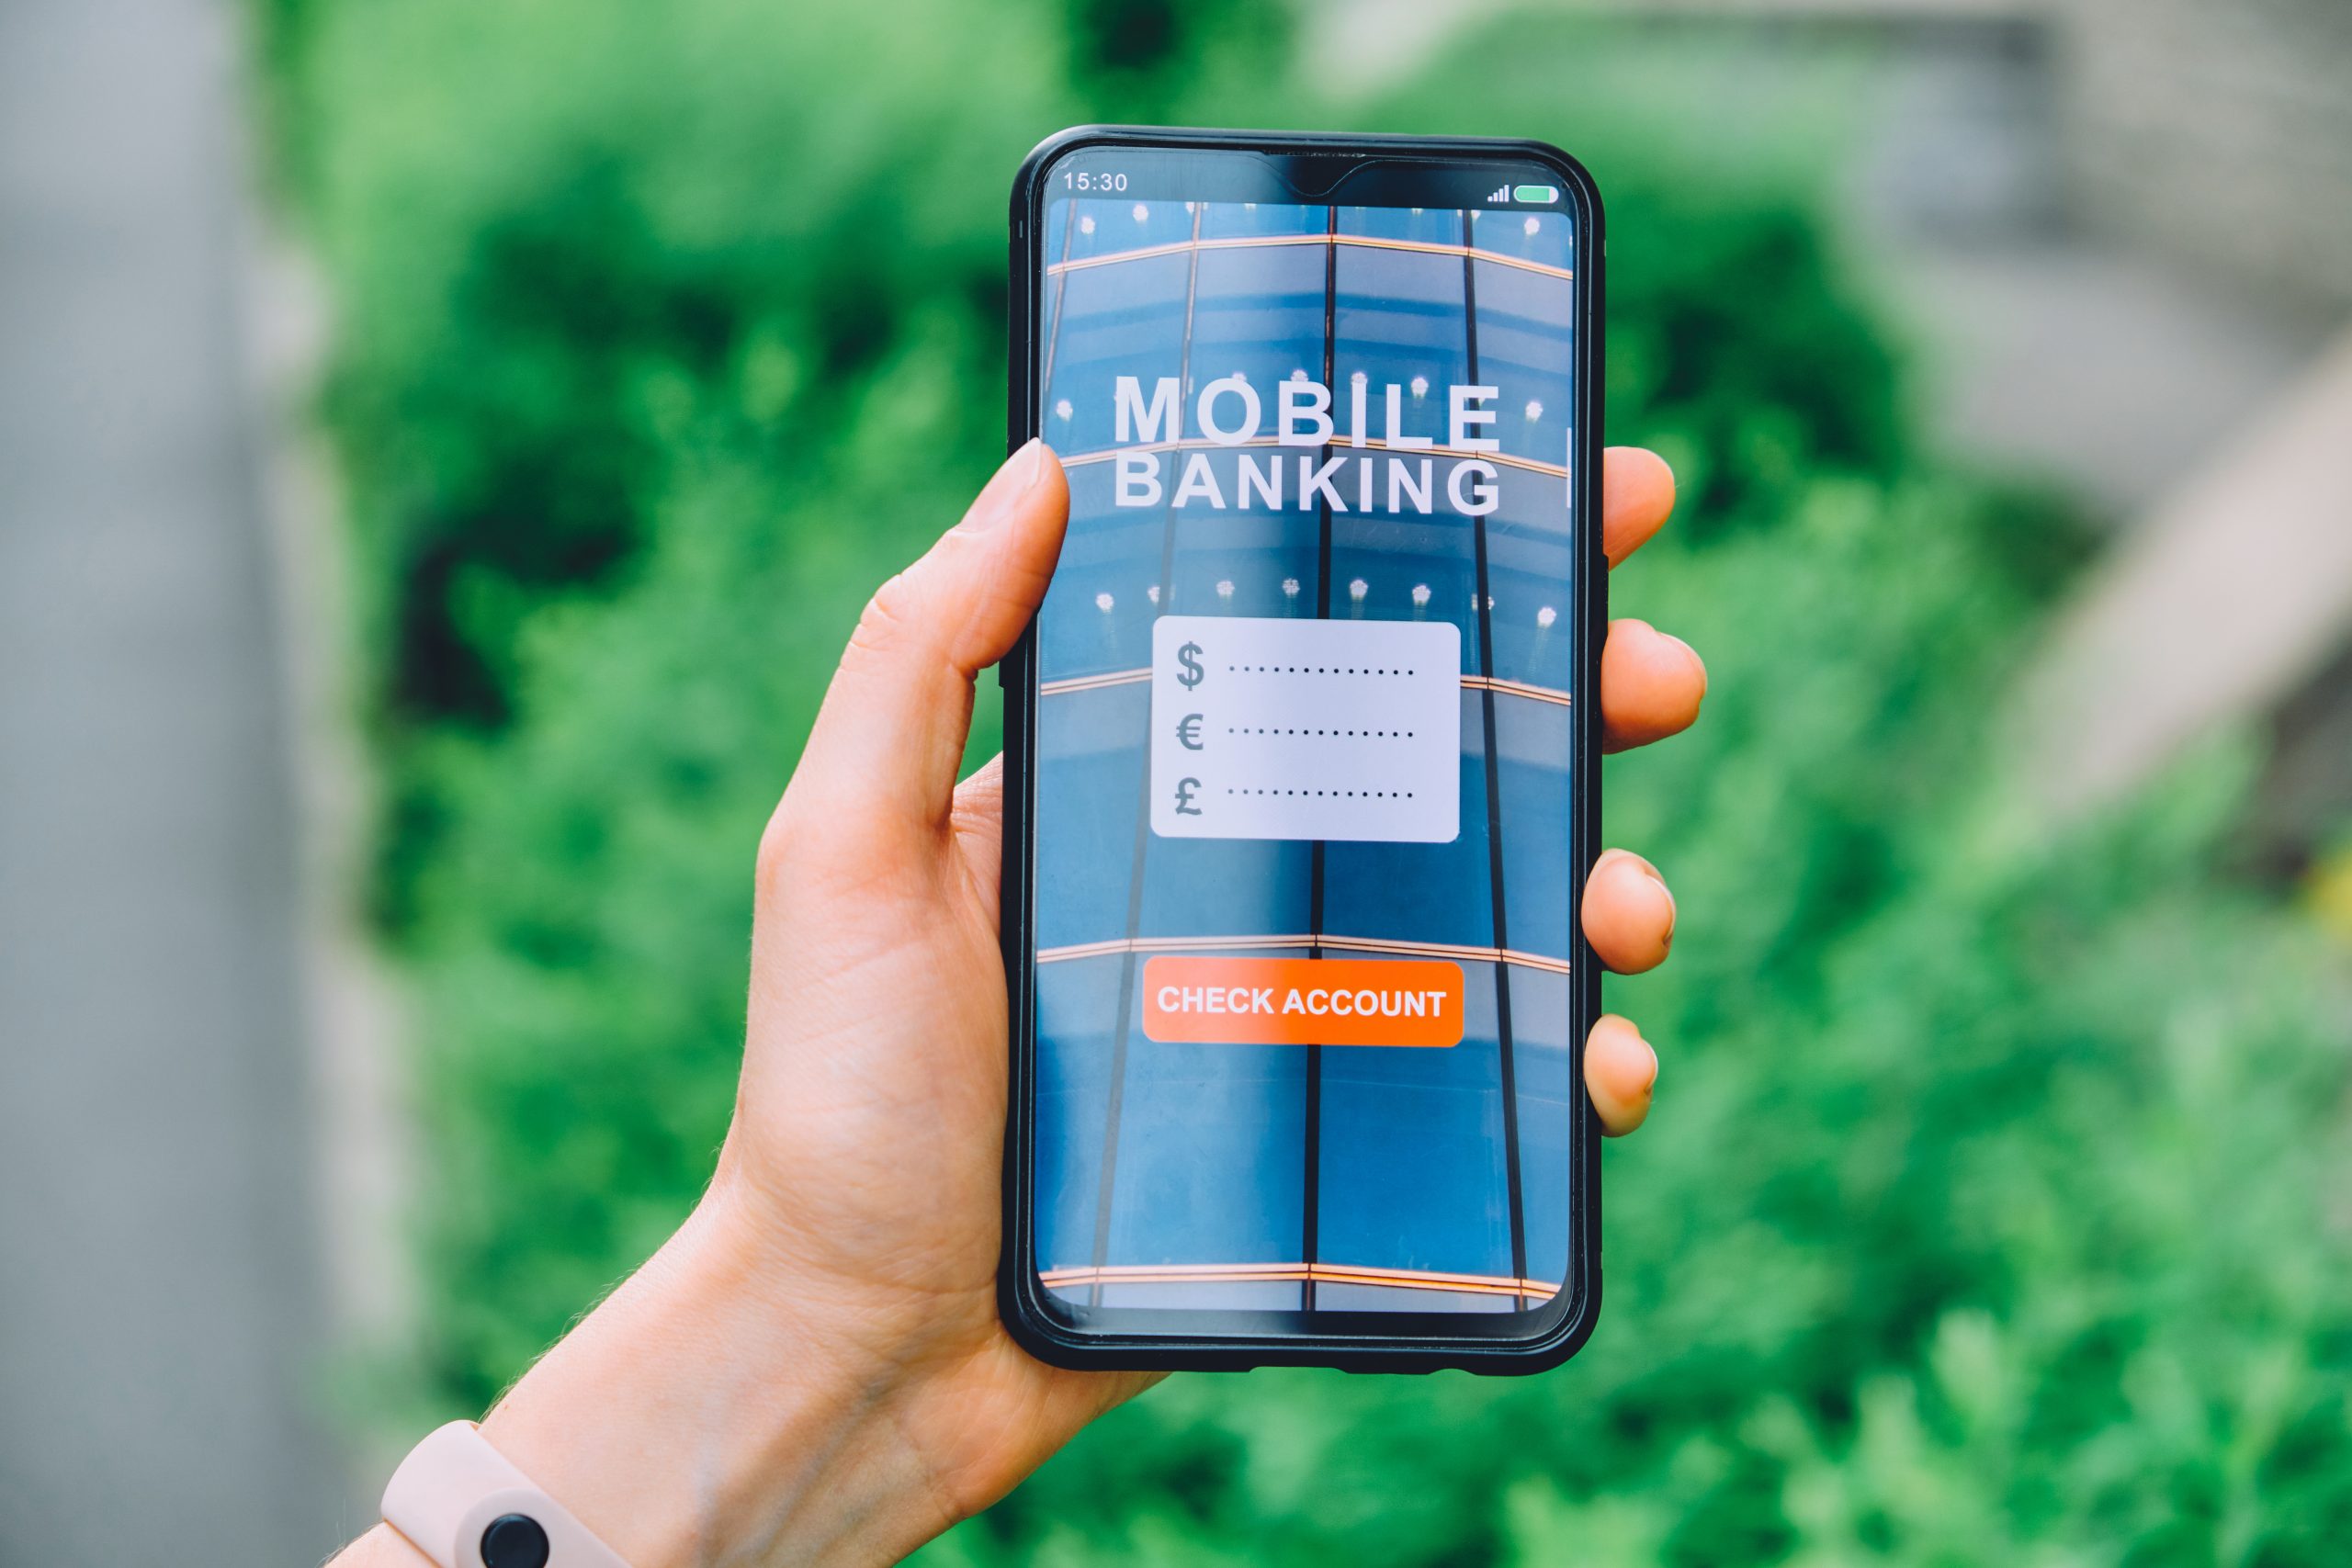 Concept checking account in a smartphone mobile banking interface application in hand